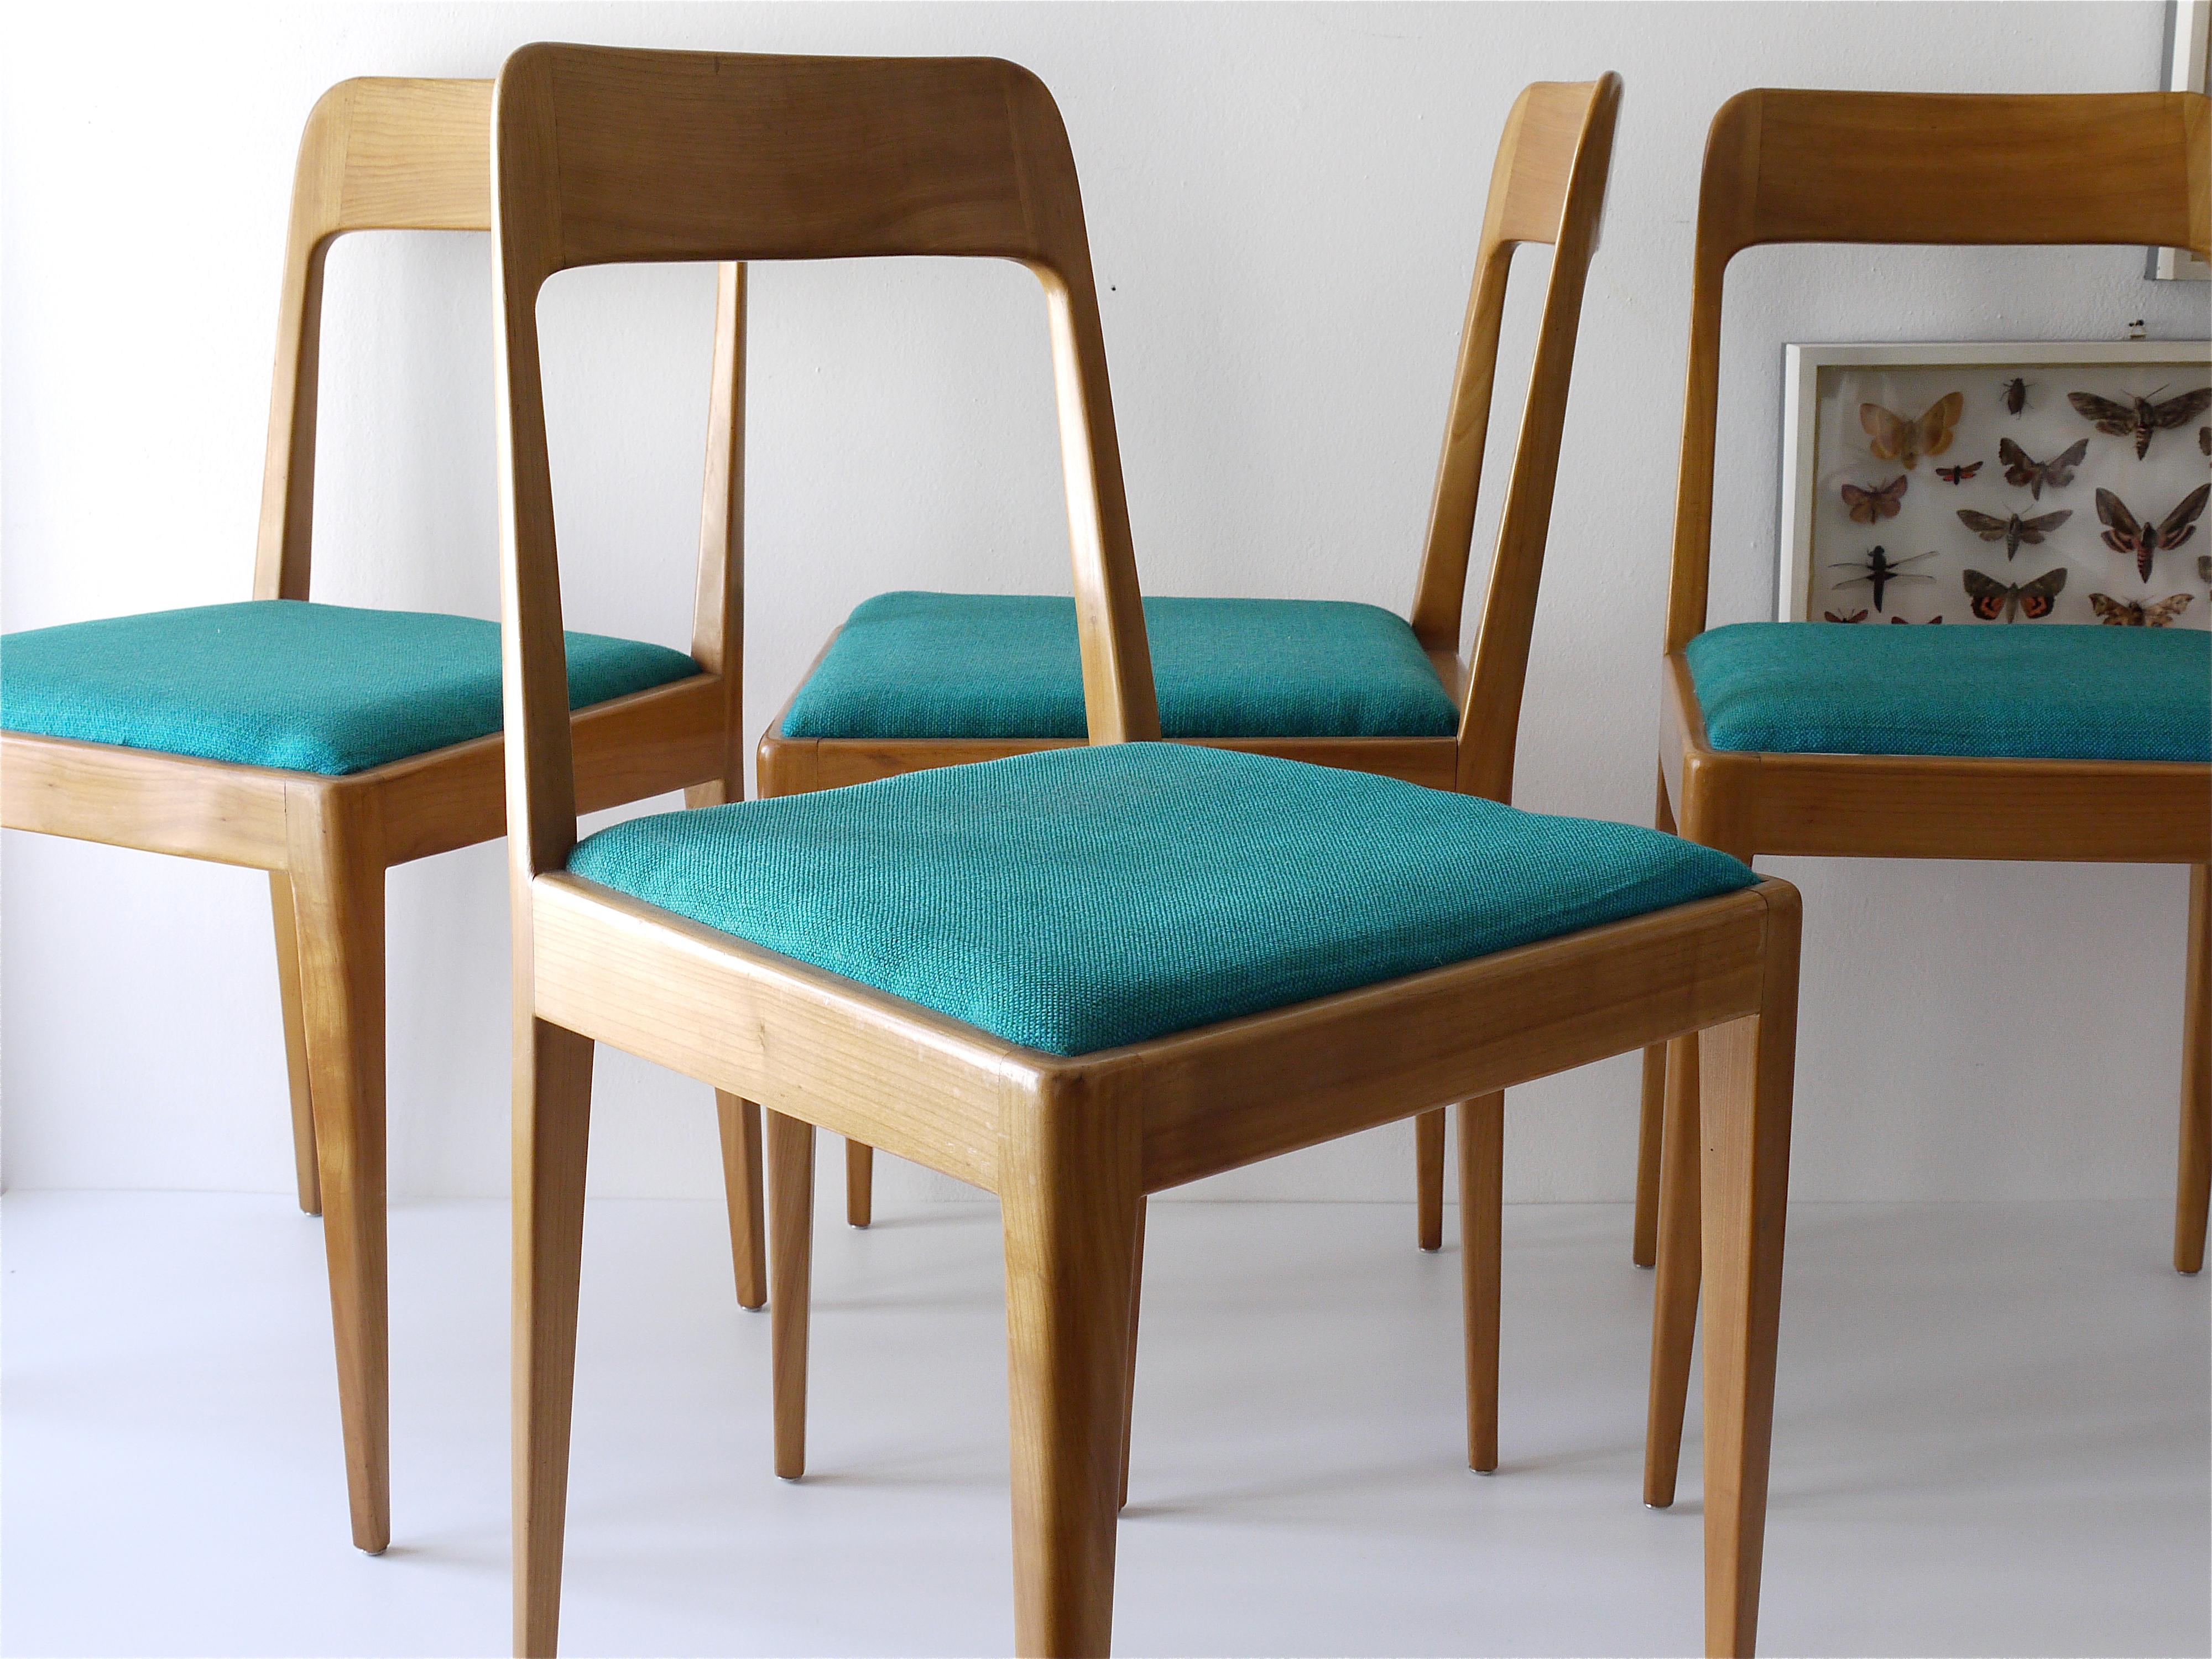 A matching set of four comfortable and elegant Austrian modernist dining room or side chairs. Model no. A7, designed and executed by Carl Aubock and Robert Nestler in the 1950s. Straight organic design, made of walnut with an upholstery of green